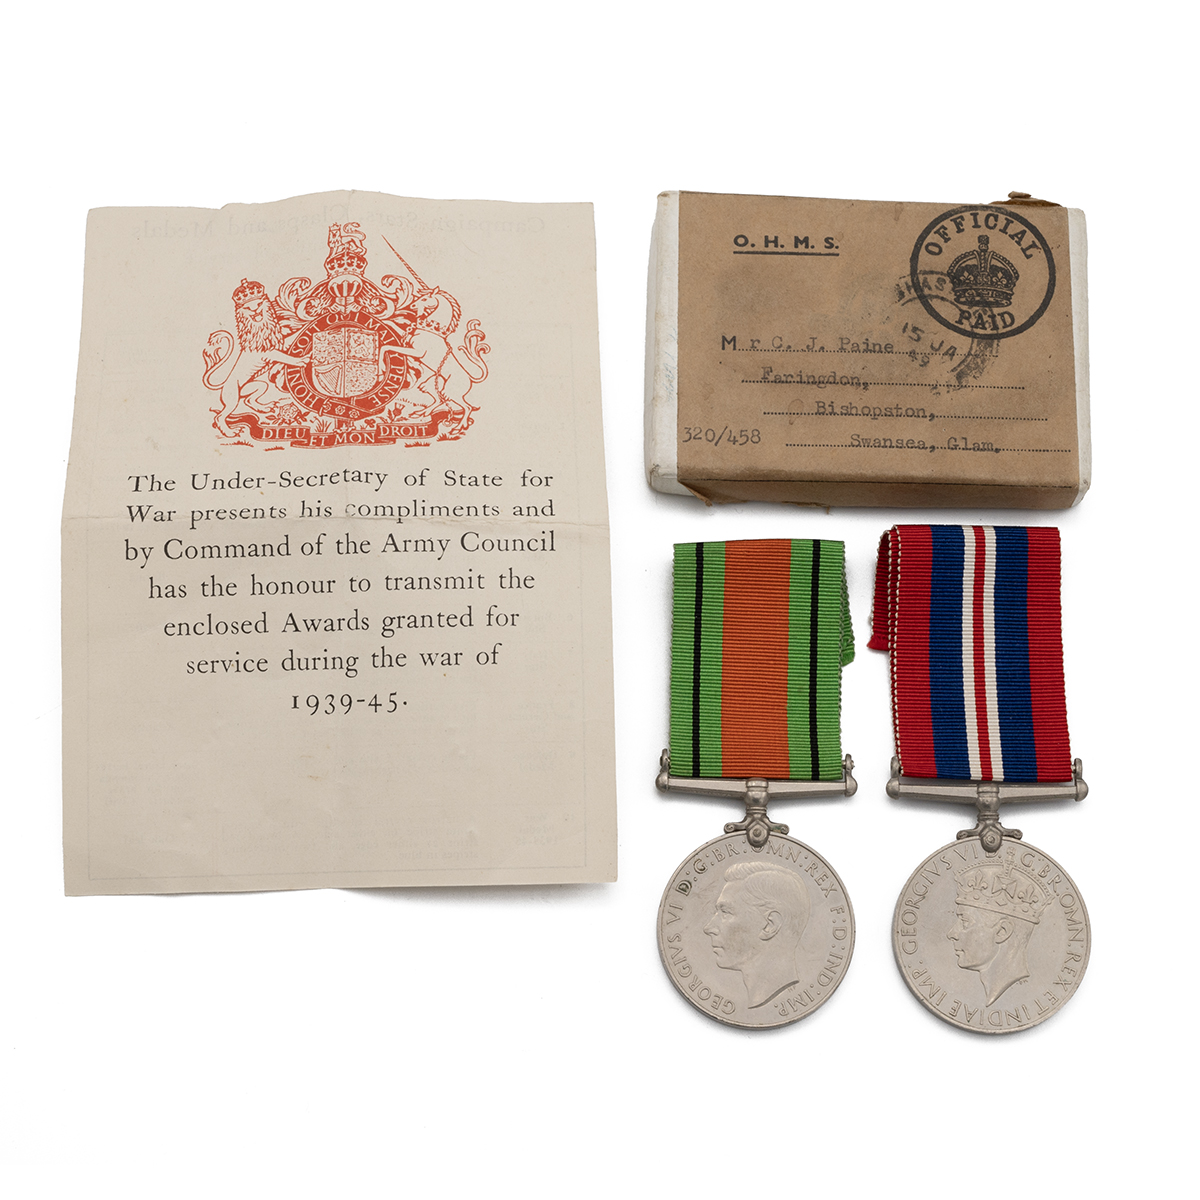 Medals (2) of C.J. Paine of R.A.S.C. & A.C.C. Defence Medal 1939-1945, and War Medal 1939-1945. S...